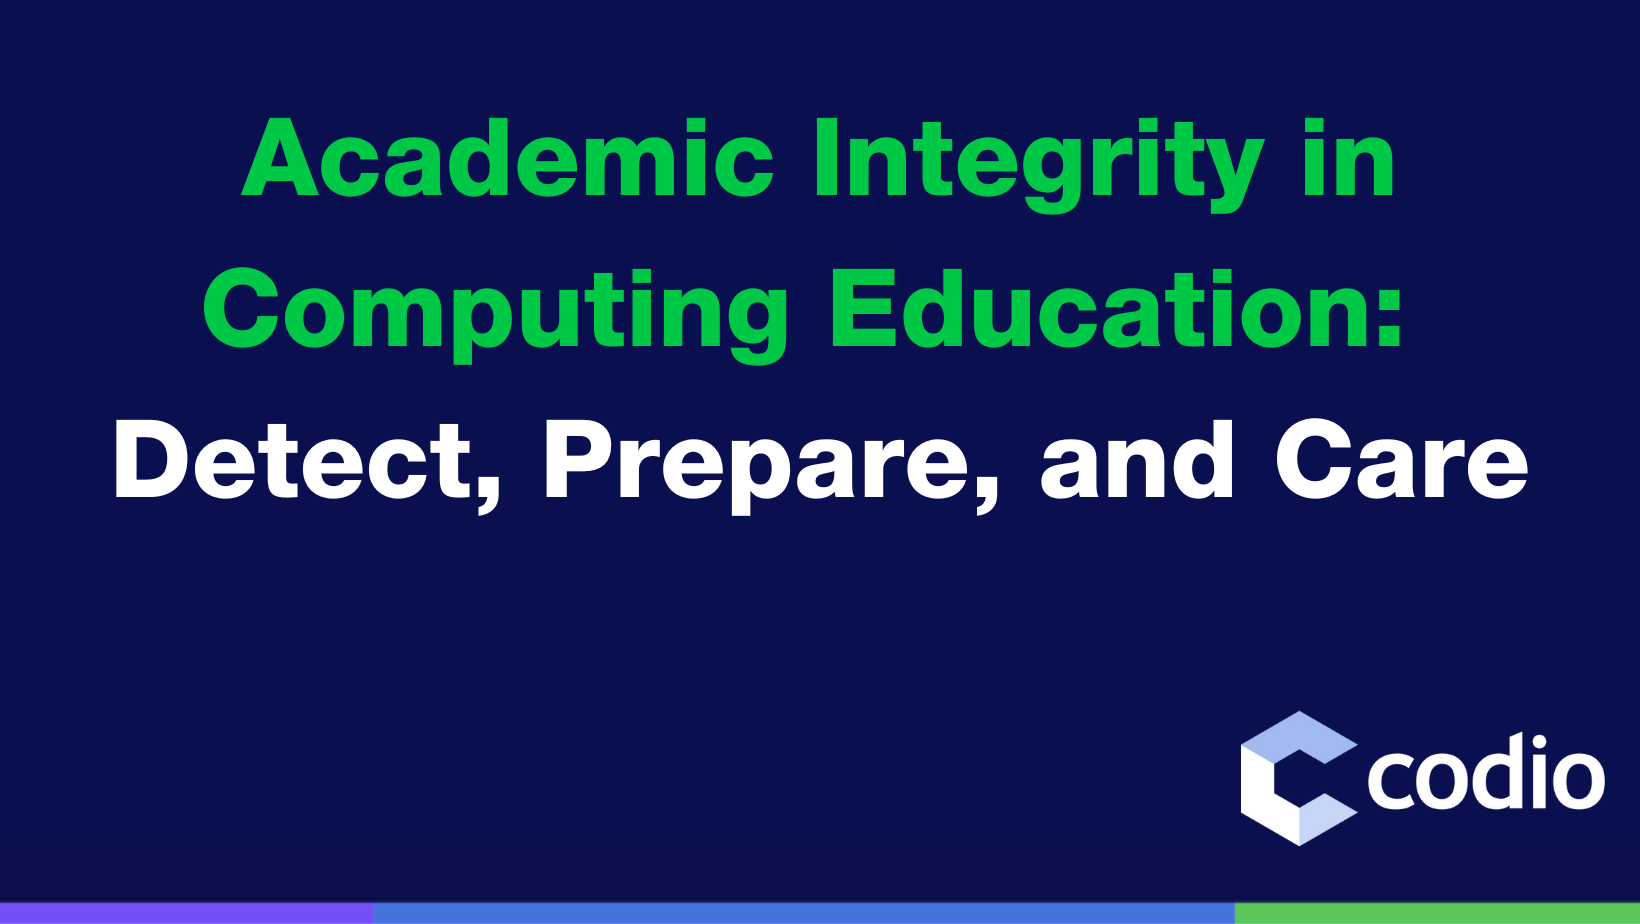 Academic Integrity in Computing Education: Detect, Prepare, and Care